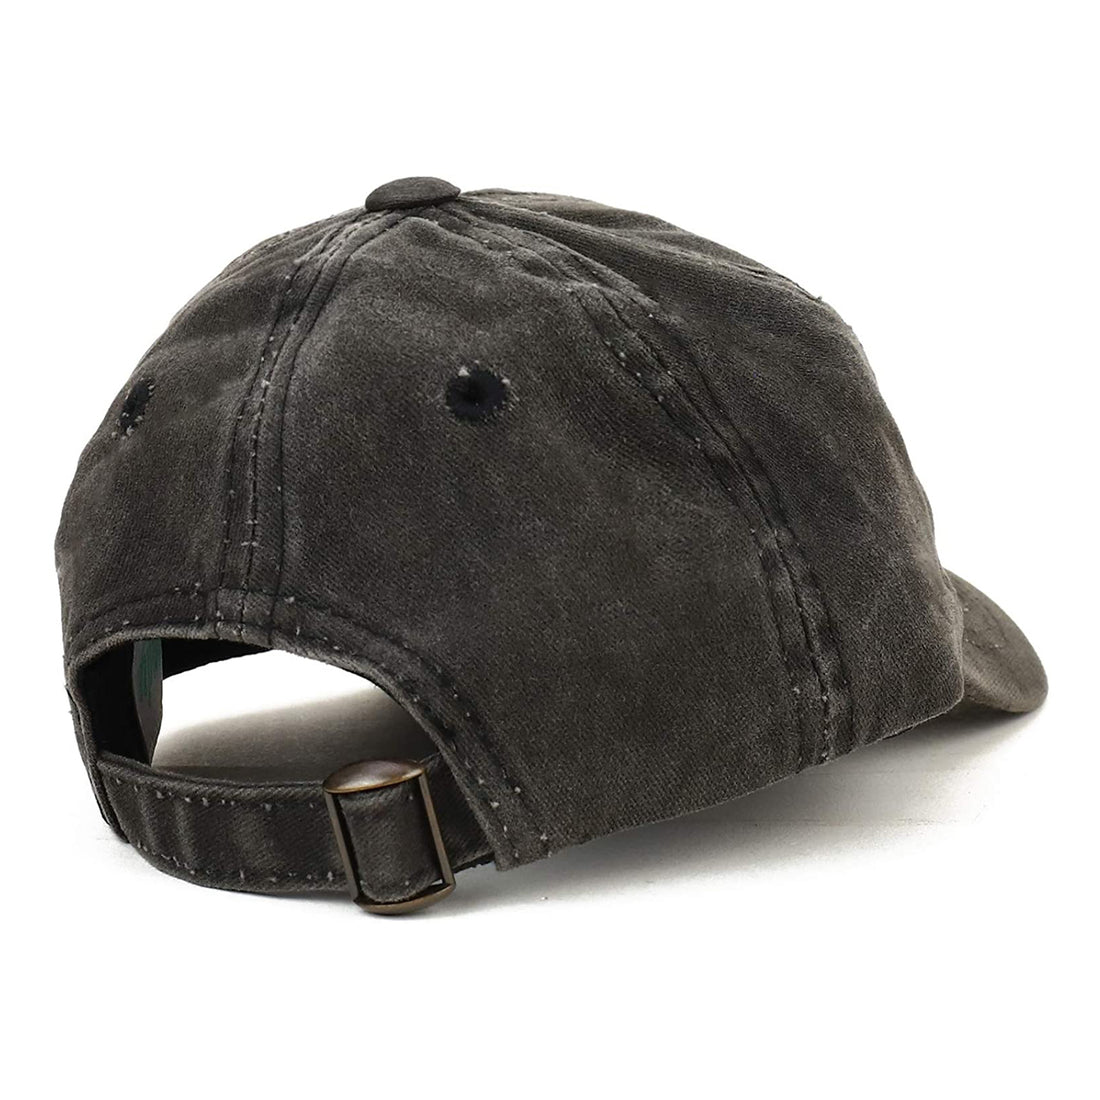 Trendy Apparel Shop Infant Size Unstructured Pigment Dyed Washed Baseball Cap